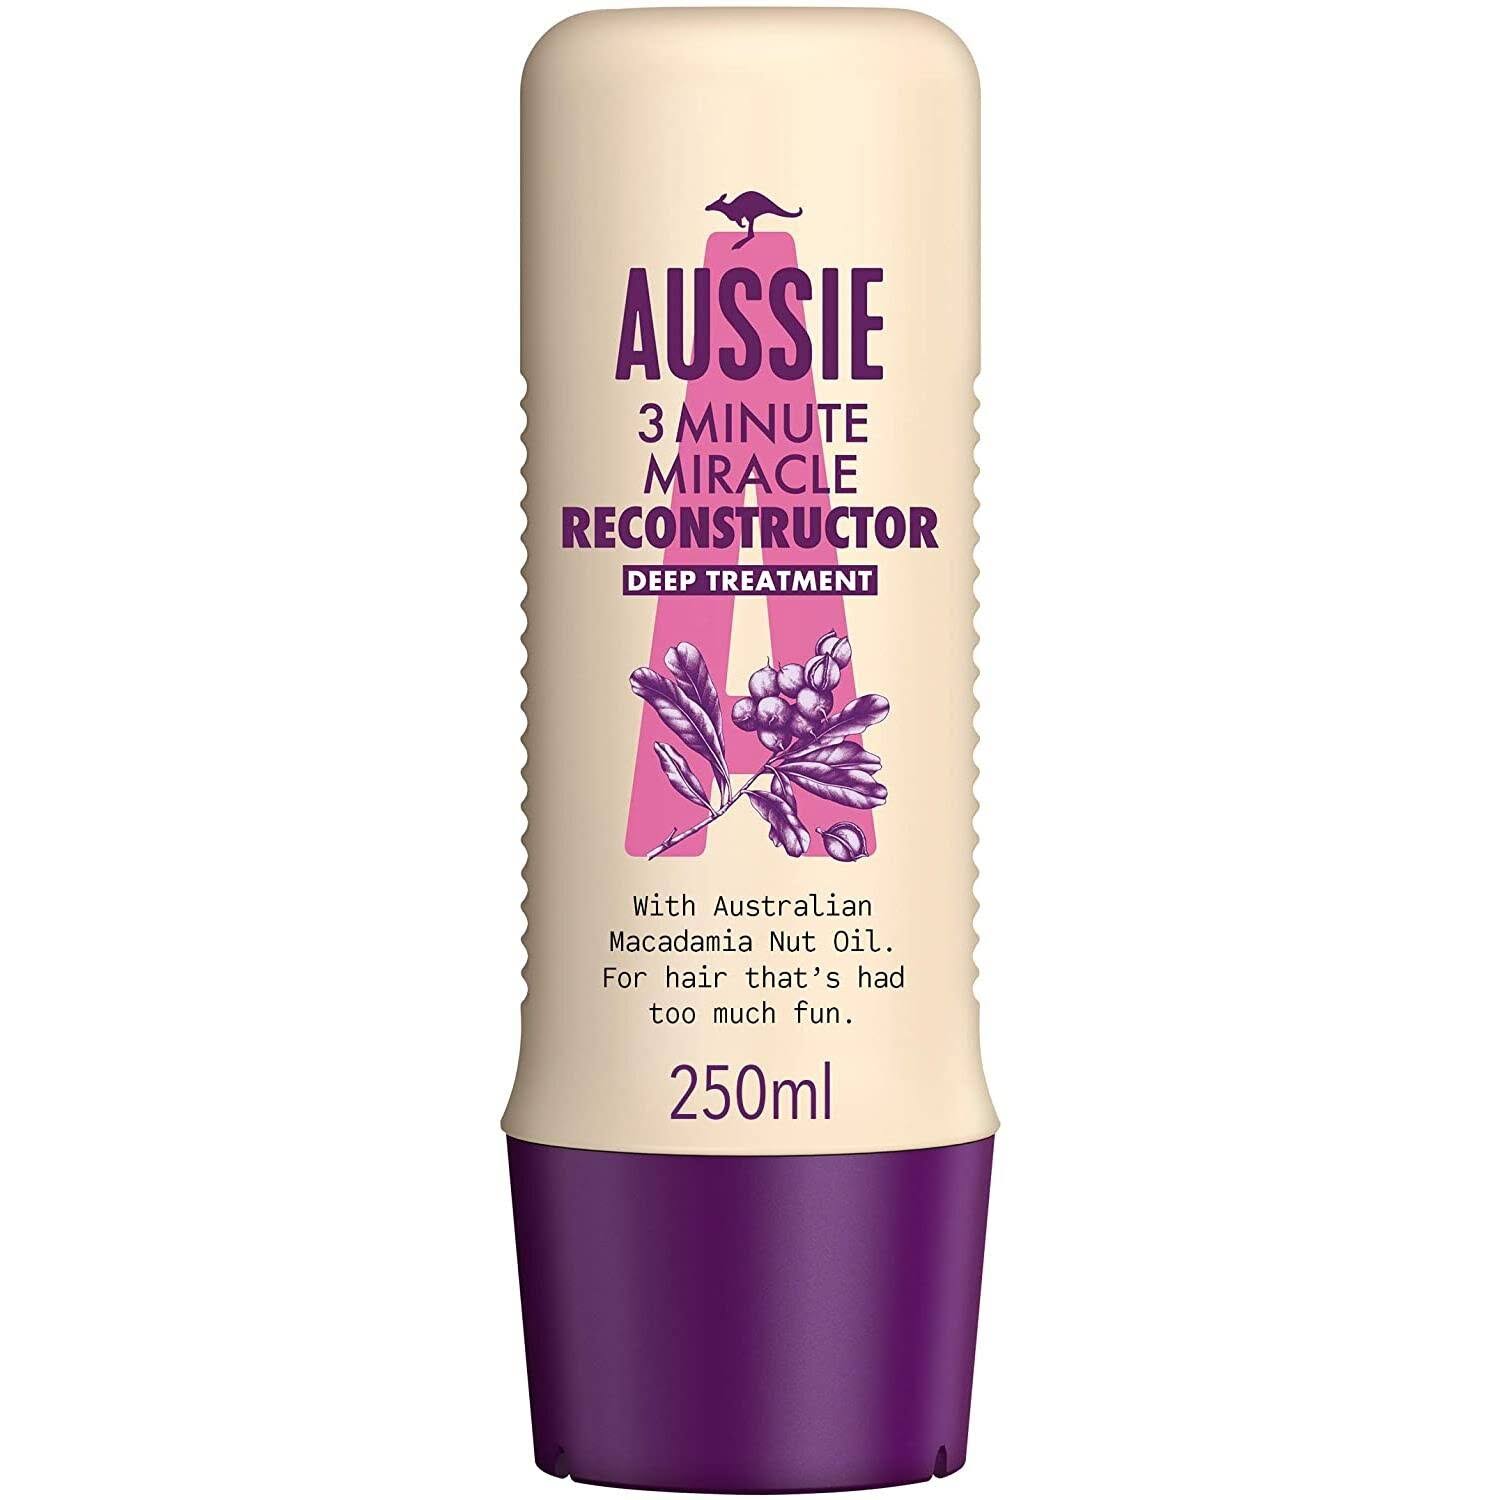 Aussie 3 Minute Miracle Reconstructor Hair Treatment - 250ml